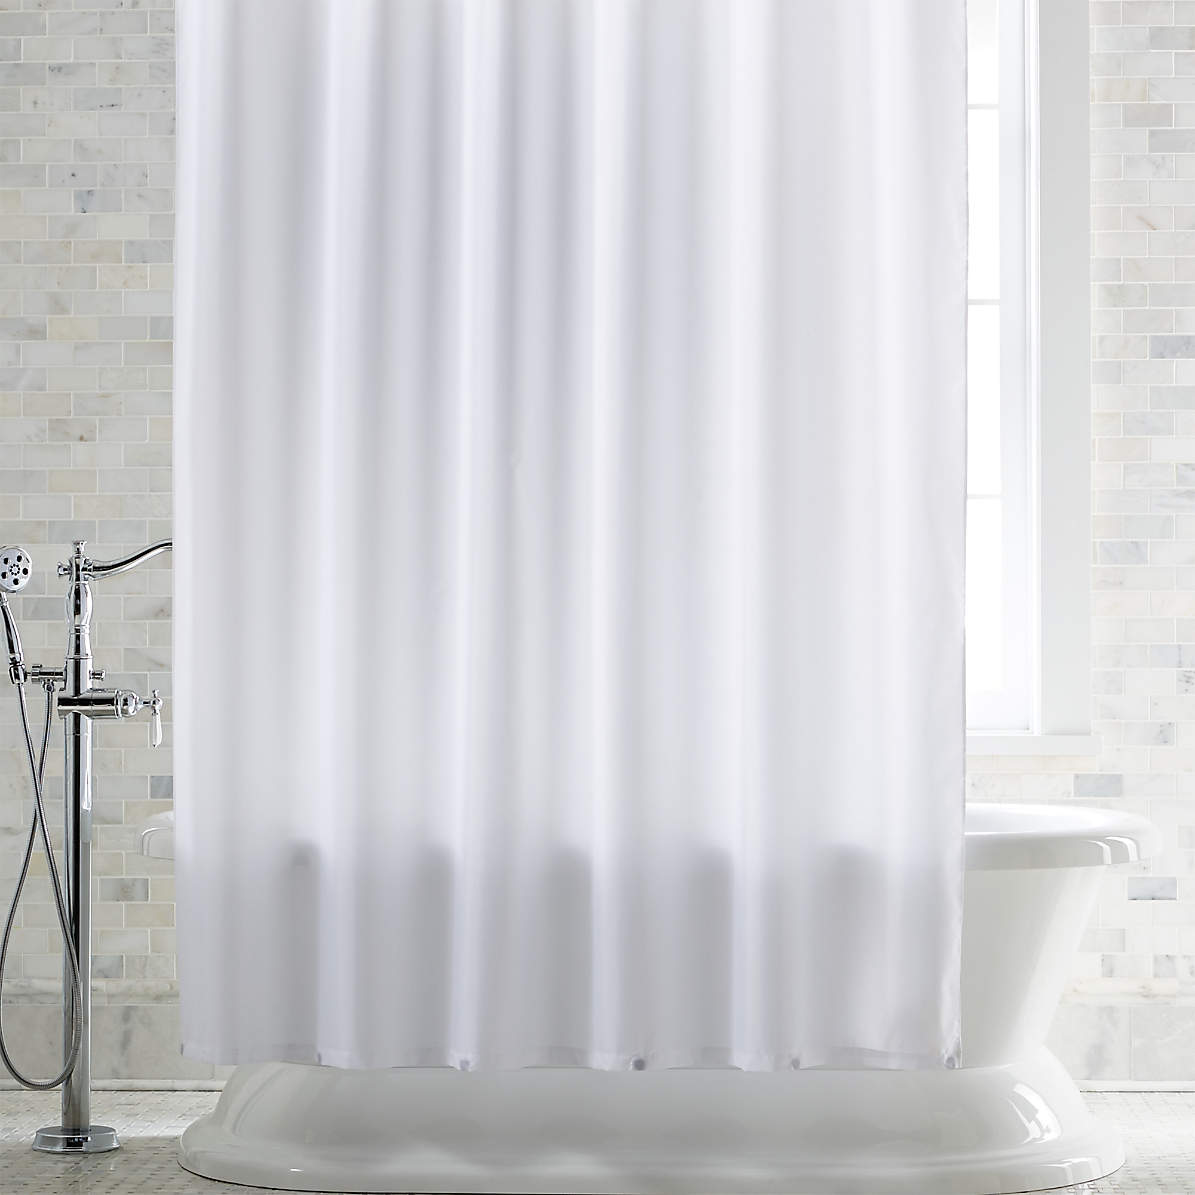 https://cb.scene7.com/is/image/Crate/WhtShowrCurtinLnrWMagsSHS17/$web_pdp_main_carousel_zoom_med$/240201164148/white-shower-curtain-liner-with-magnets.jpg